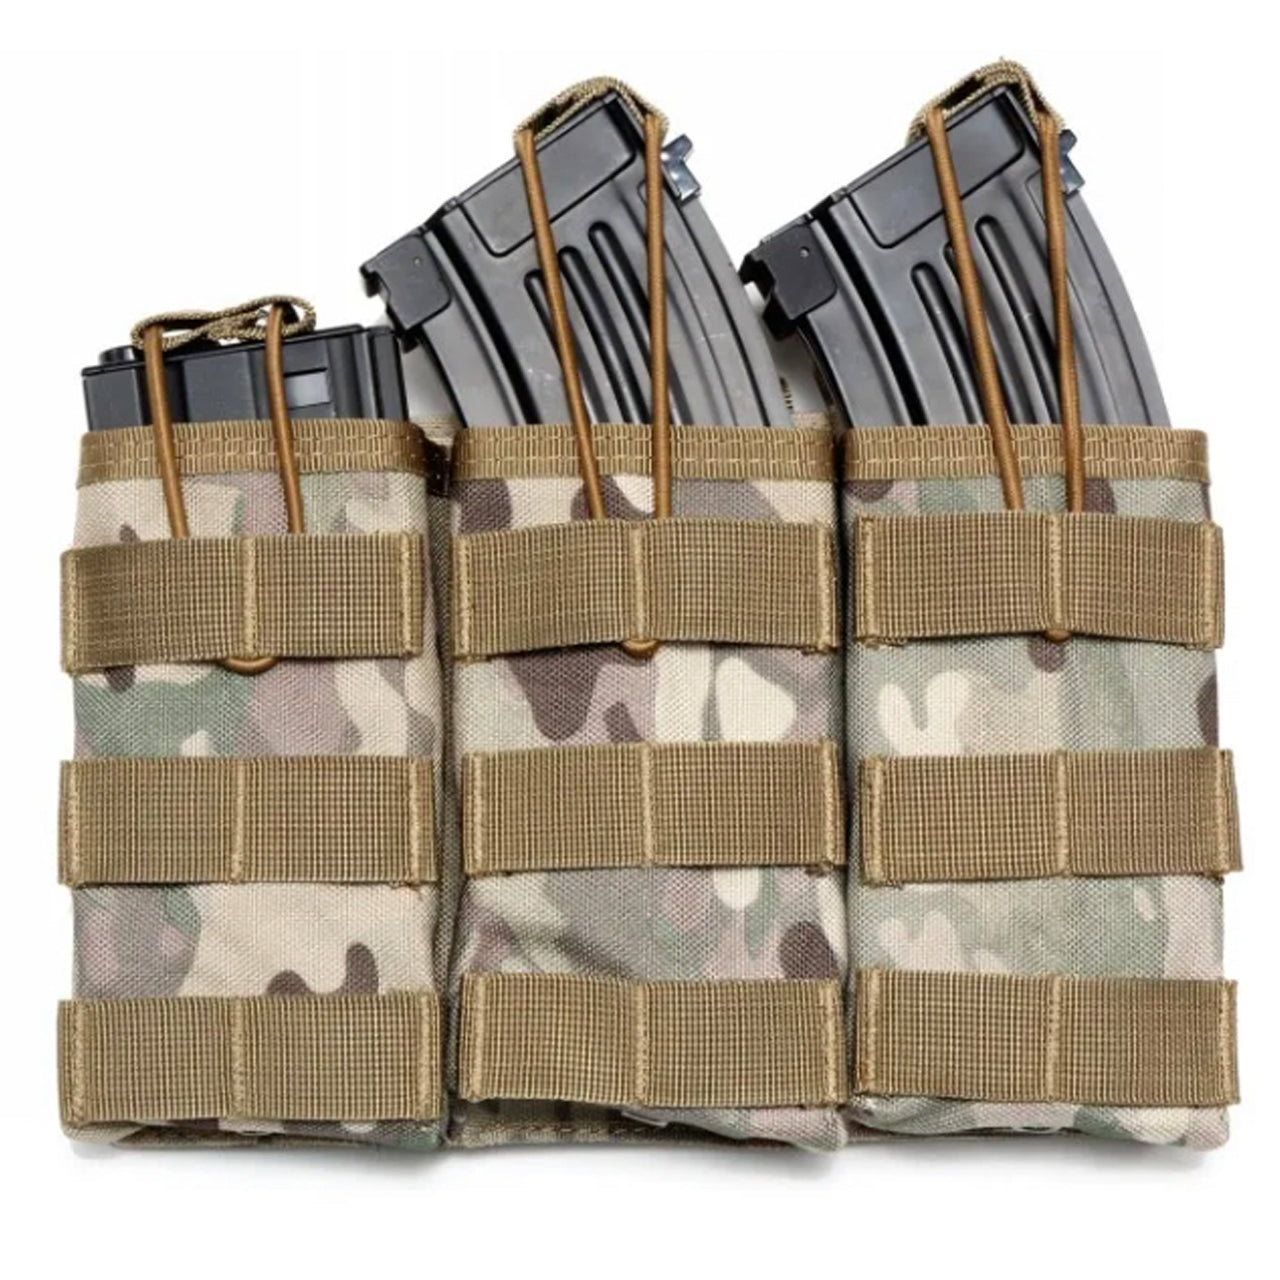 Experience the convenience of the Airsoft Combat Triple Mag Pouch! With a simple open-top design and elastic bungee cord fasteners featuring easy pull tabs, it's hassle-free to carry your magazines. www.moralepatches.com.au